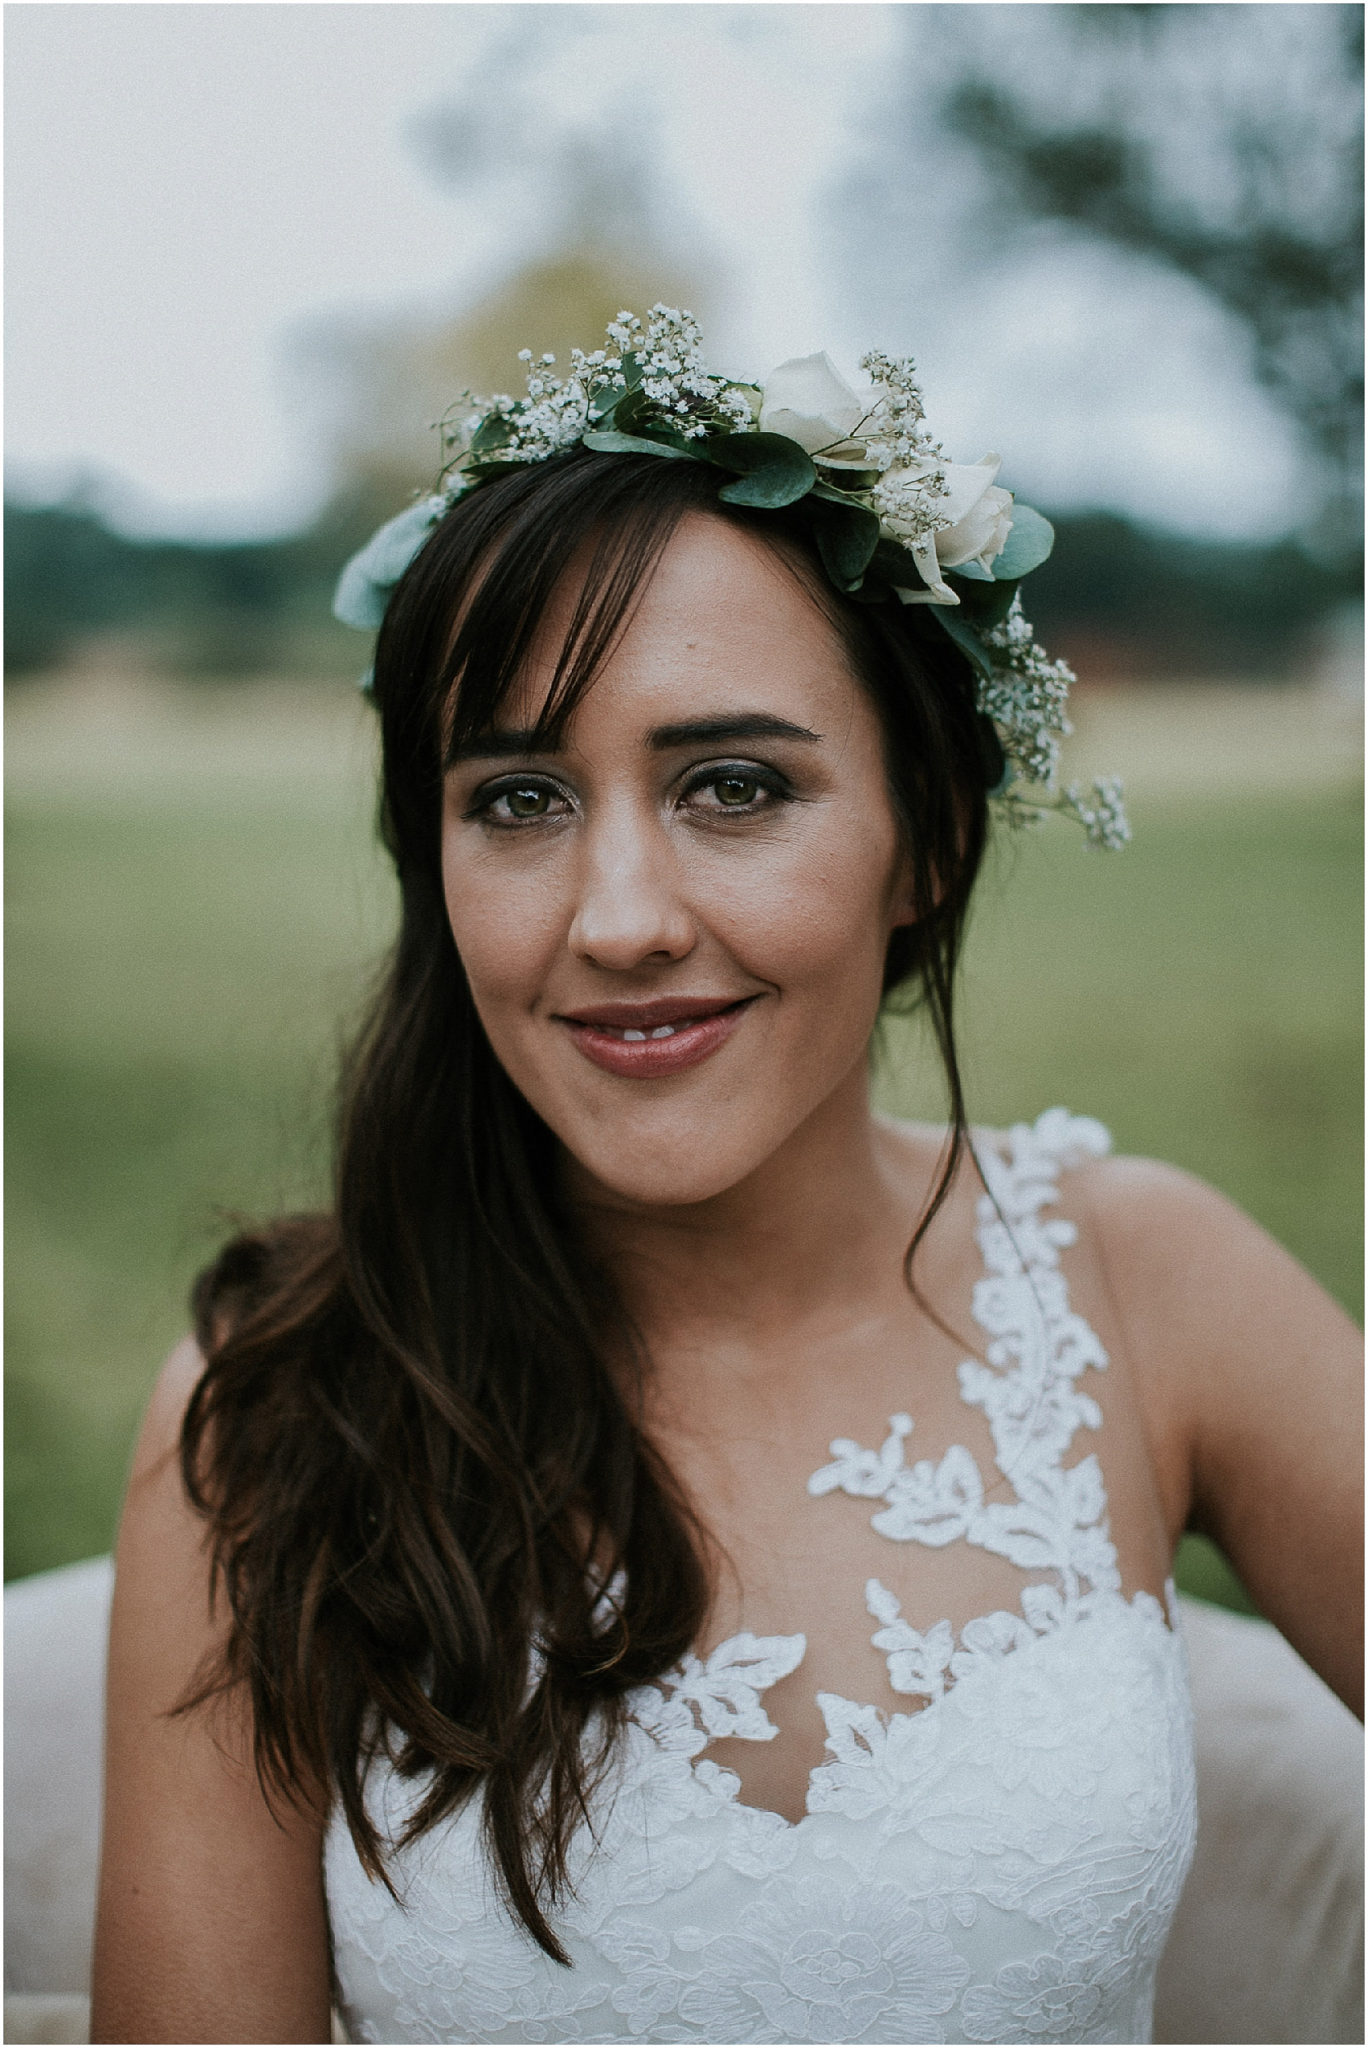 Outdoor-Forest-Destination-Wedding-Photographer-Maryke-Albertyn-Photography-Looks-Like-Film-Authentic-Alternative-Cape-Town-Pretoria-Silver-Sixpence-Dullstroom-Bridal-Portraits